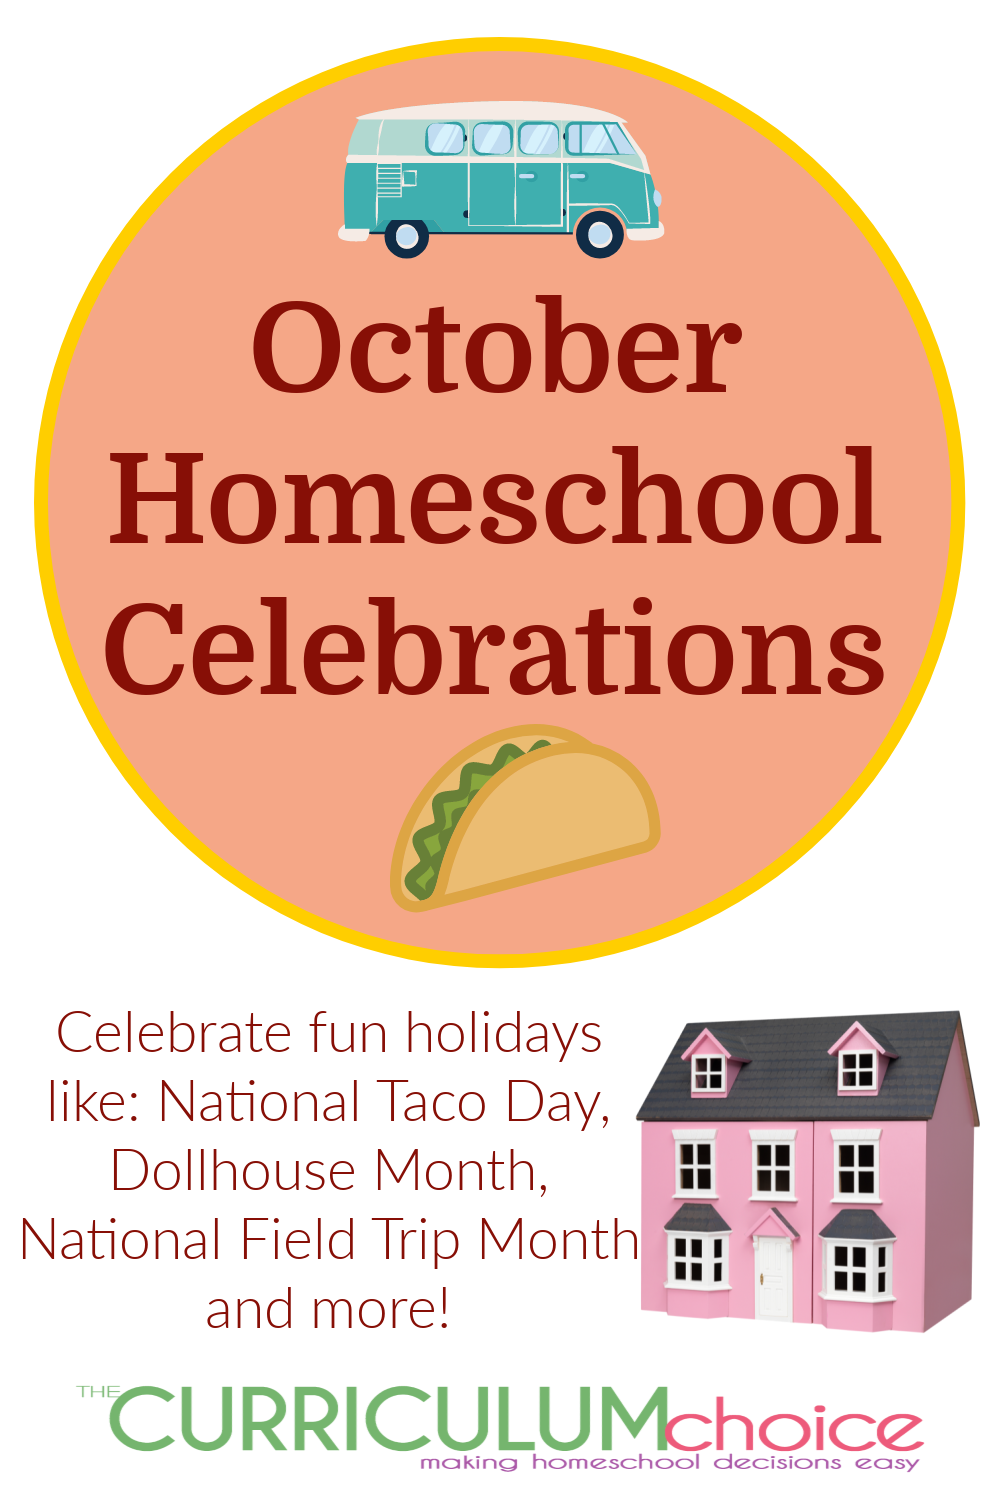 October homeschool family fun ideas! Celebrate thirty-one days of fun with wacky October holidays like National taco Day and Dollhouse Month.